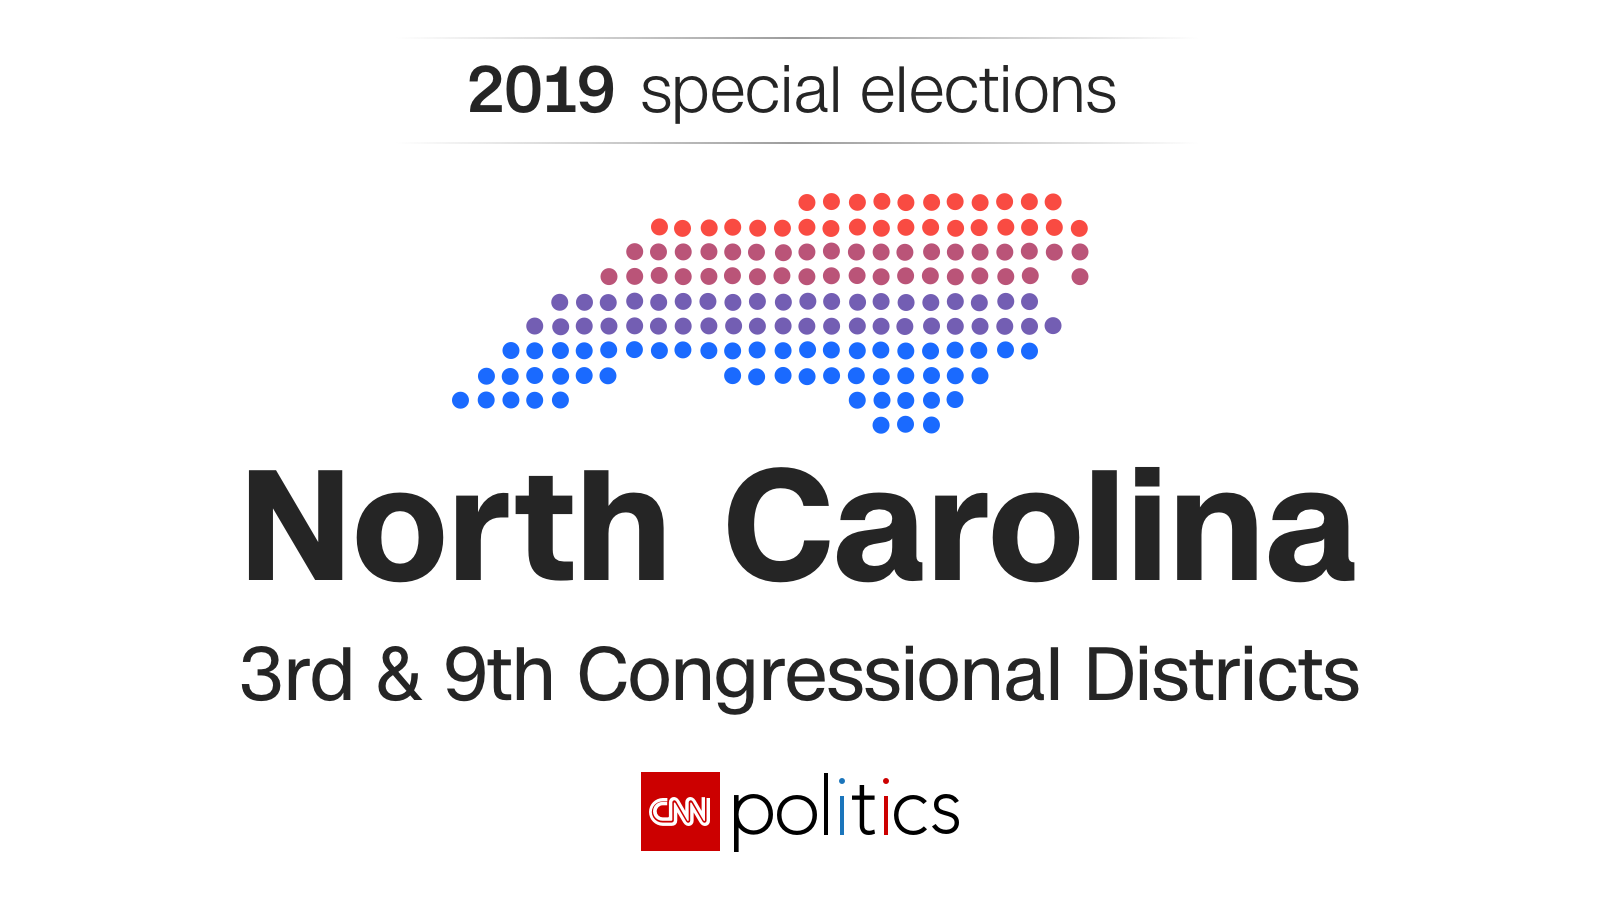 North Carolina 3rd Congressional District election results